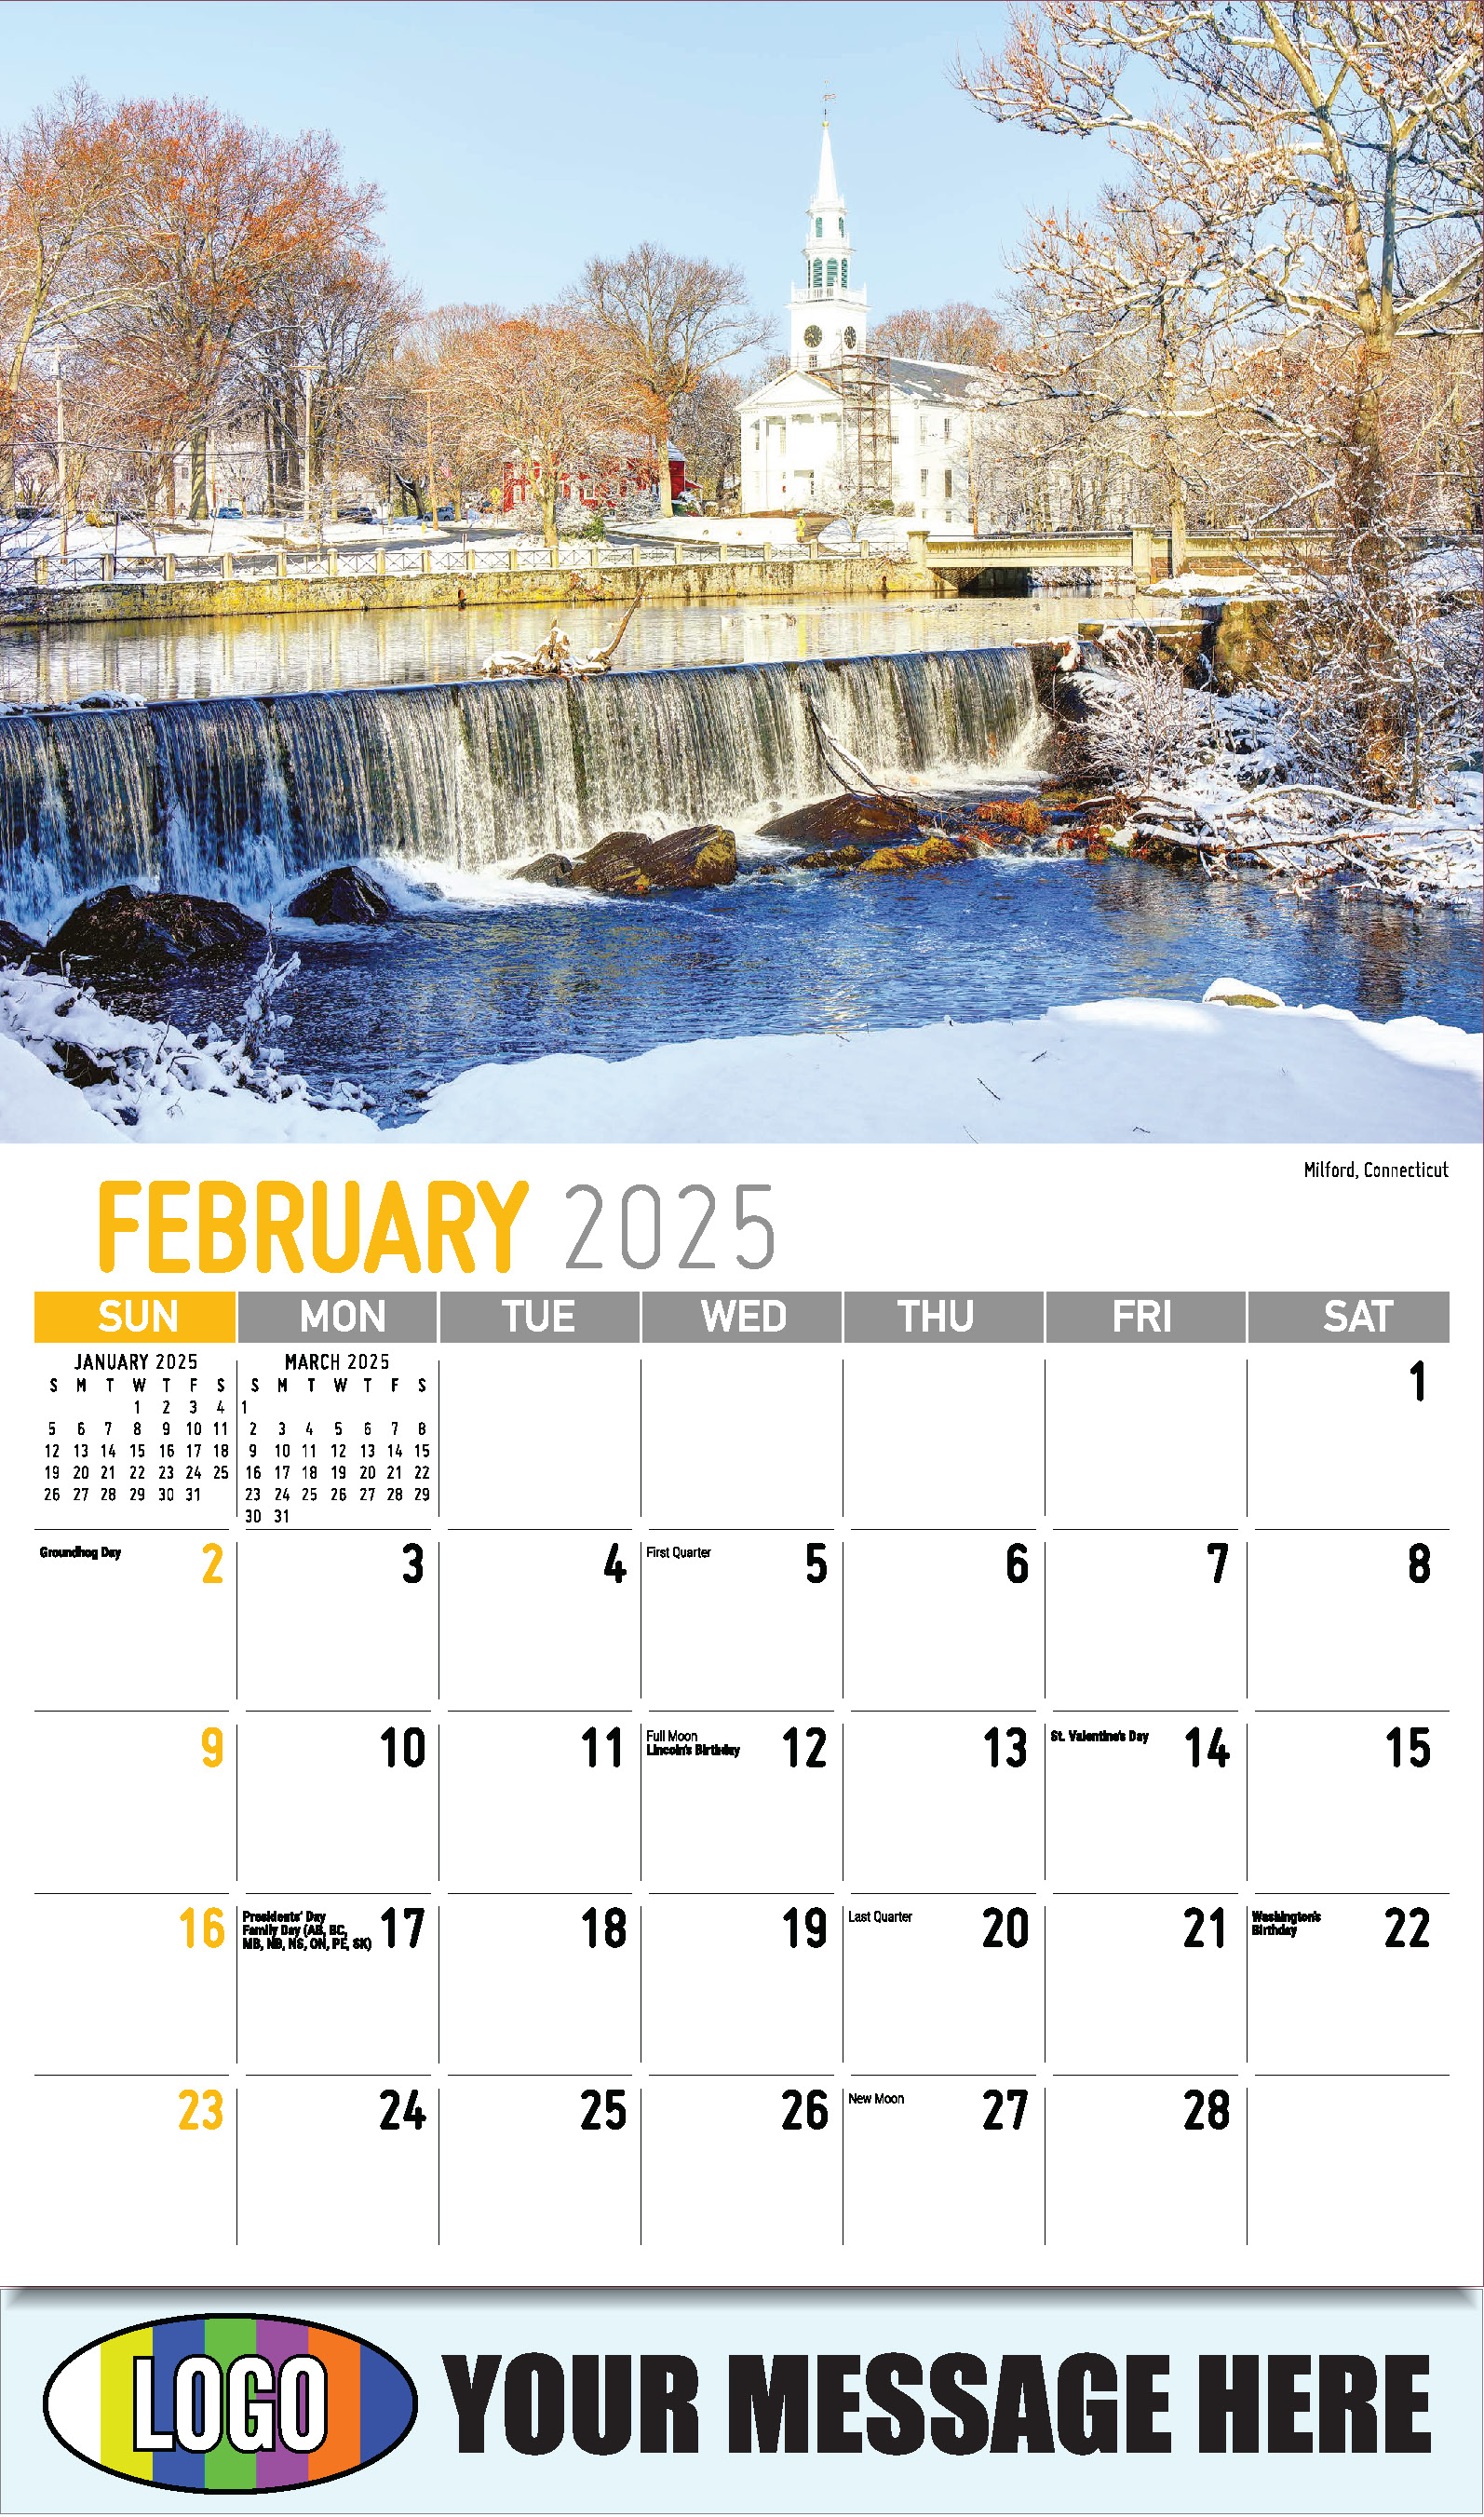 Scenes of New England 2025 Business Advertising Wall Calendar - February